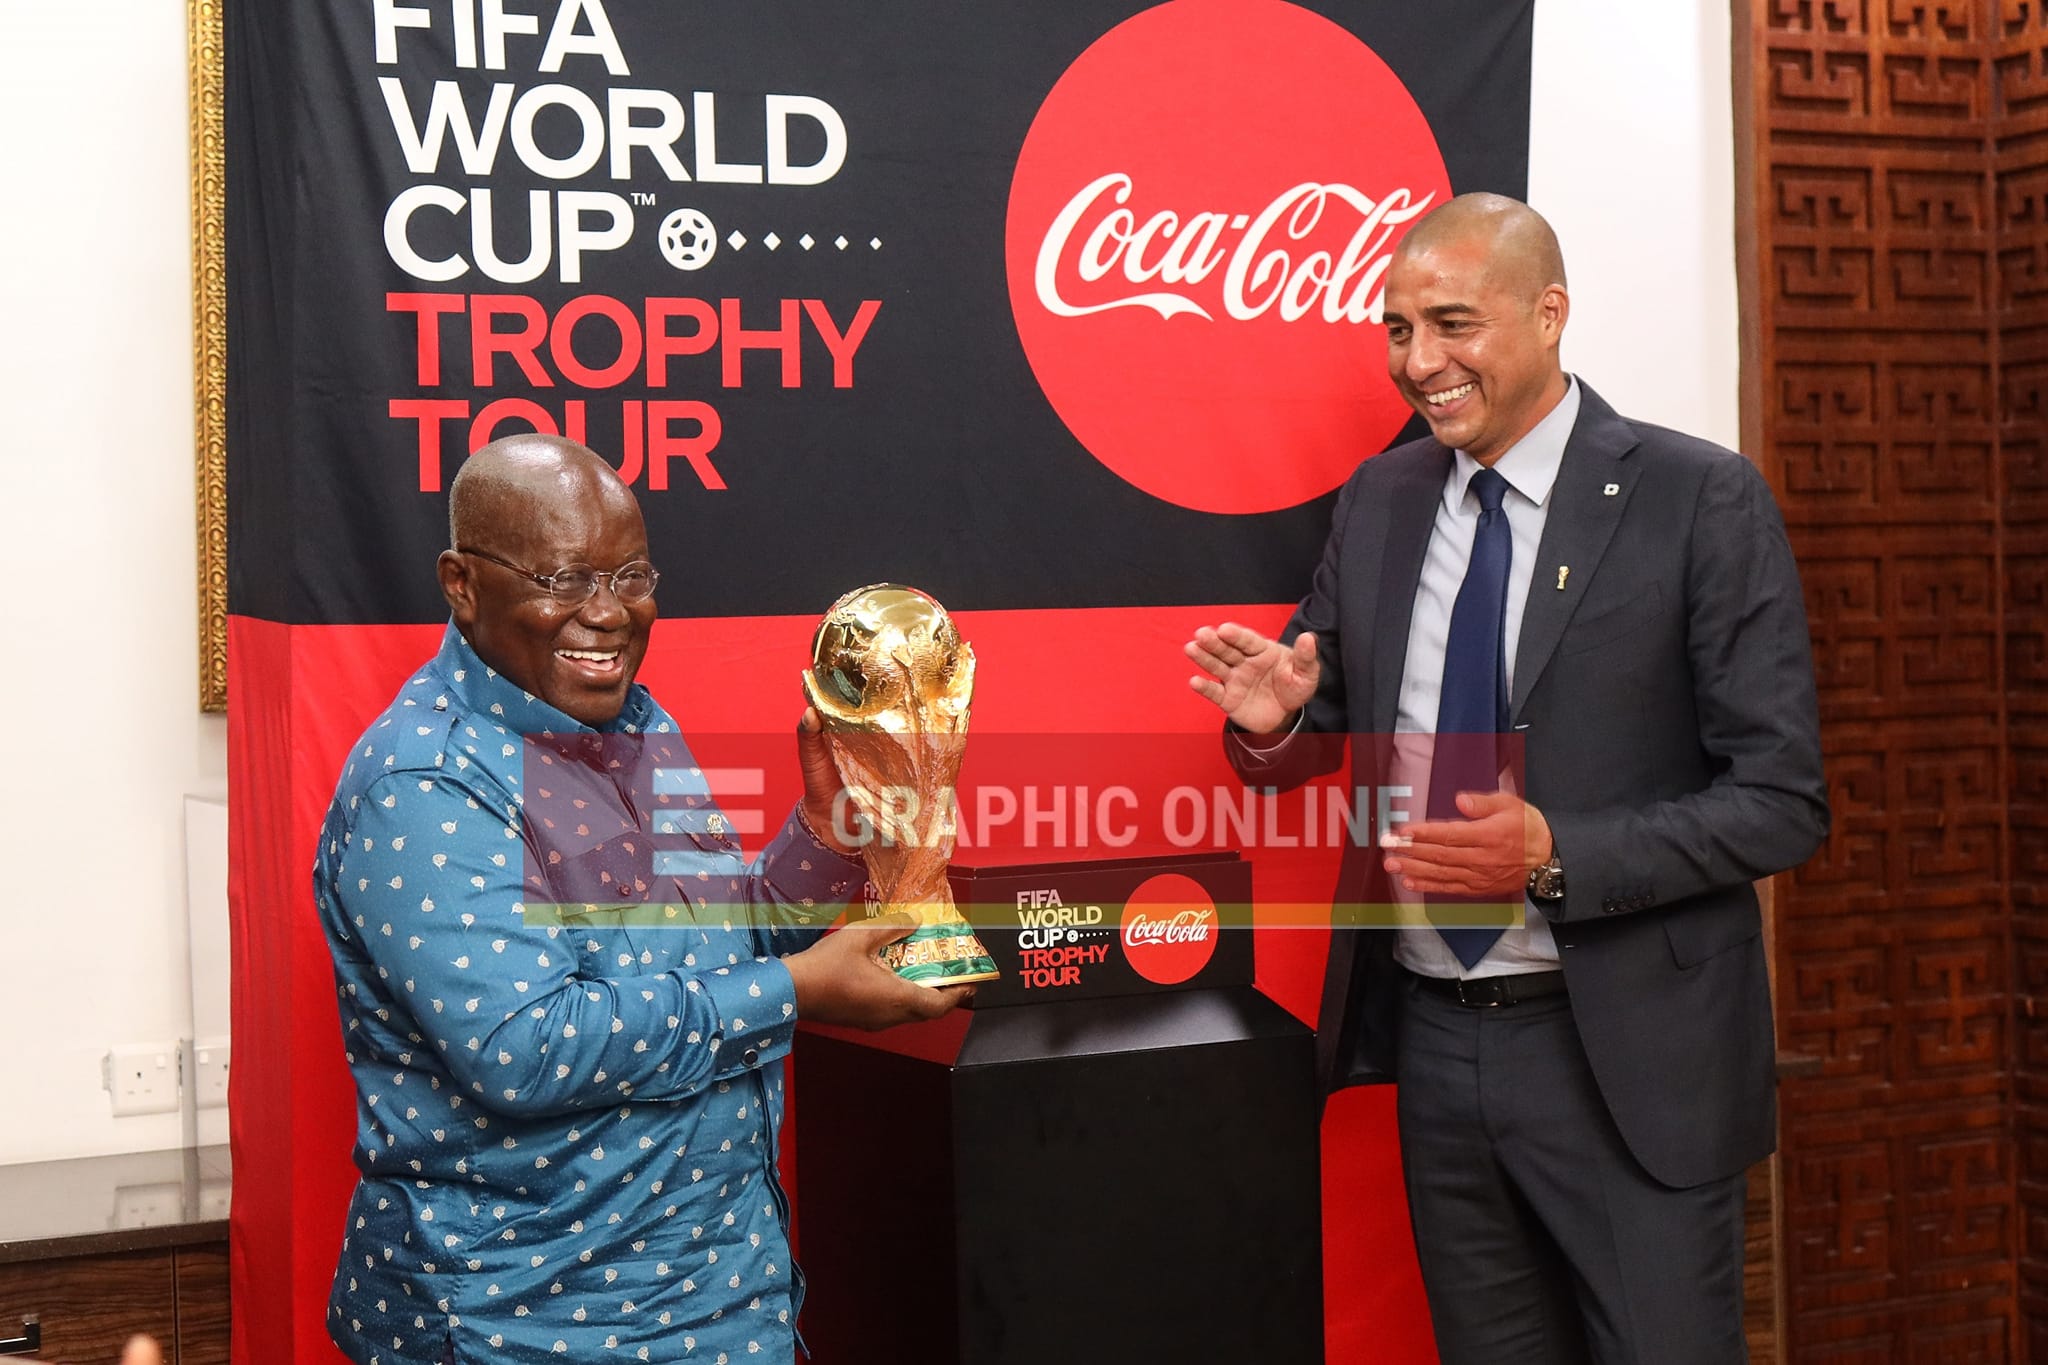 Ghana will be first to bring FIFA World Cup to Africa - President Akufo-Addo